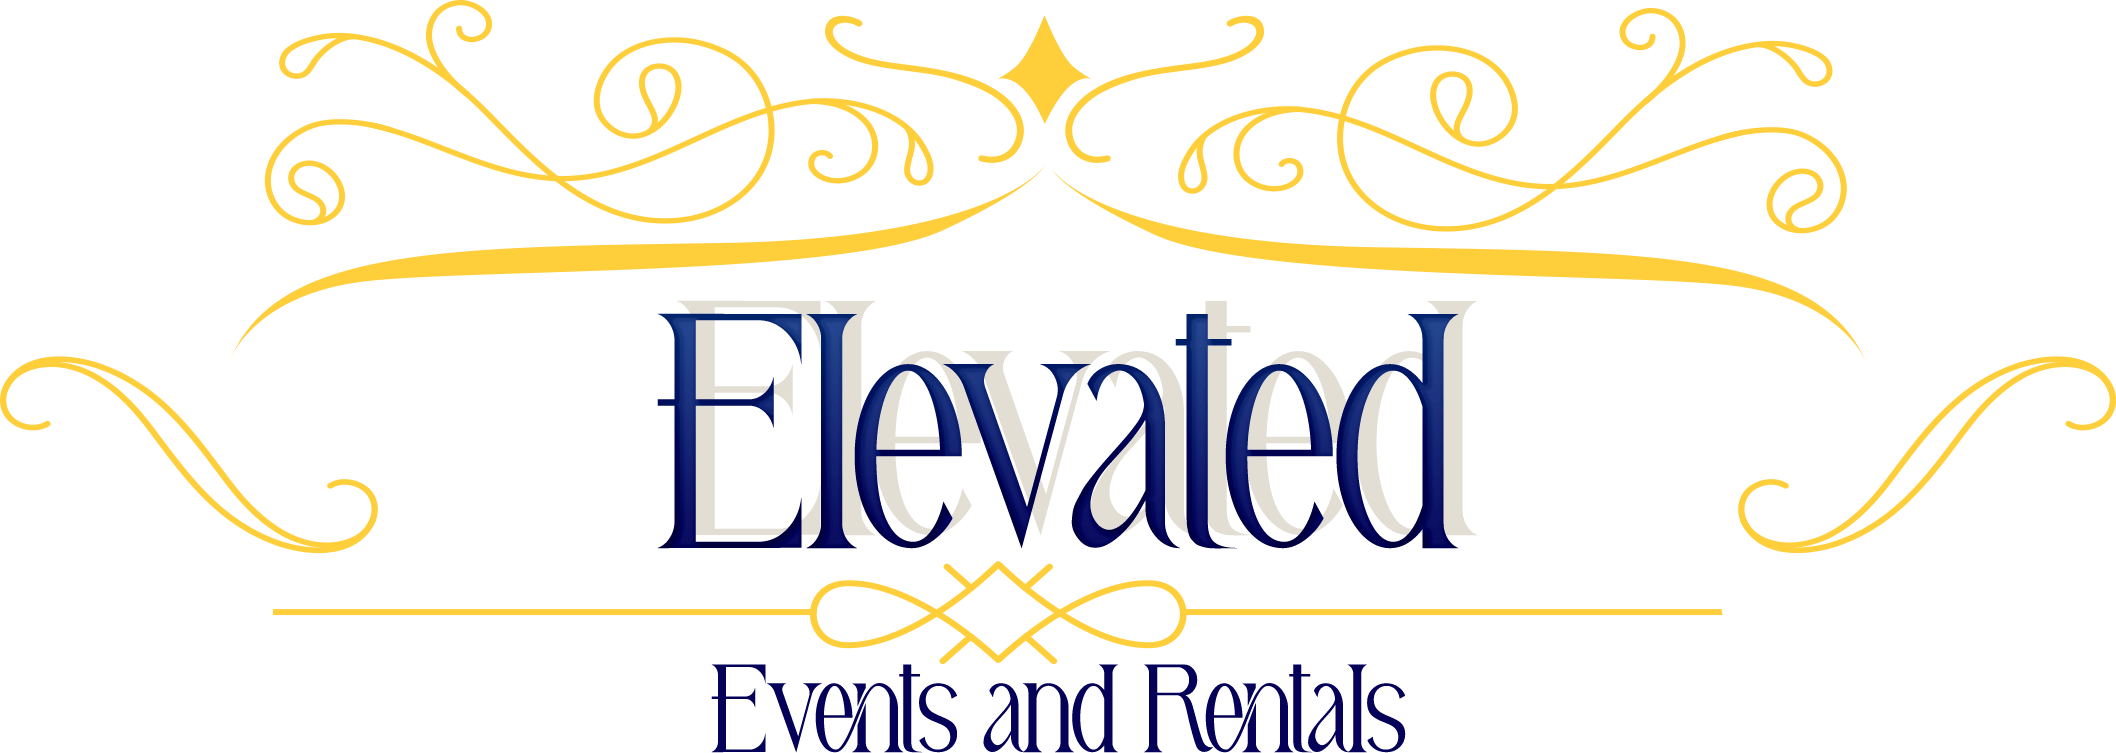 Events and Rentals Home